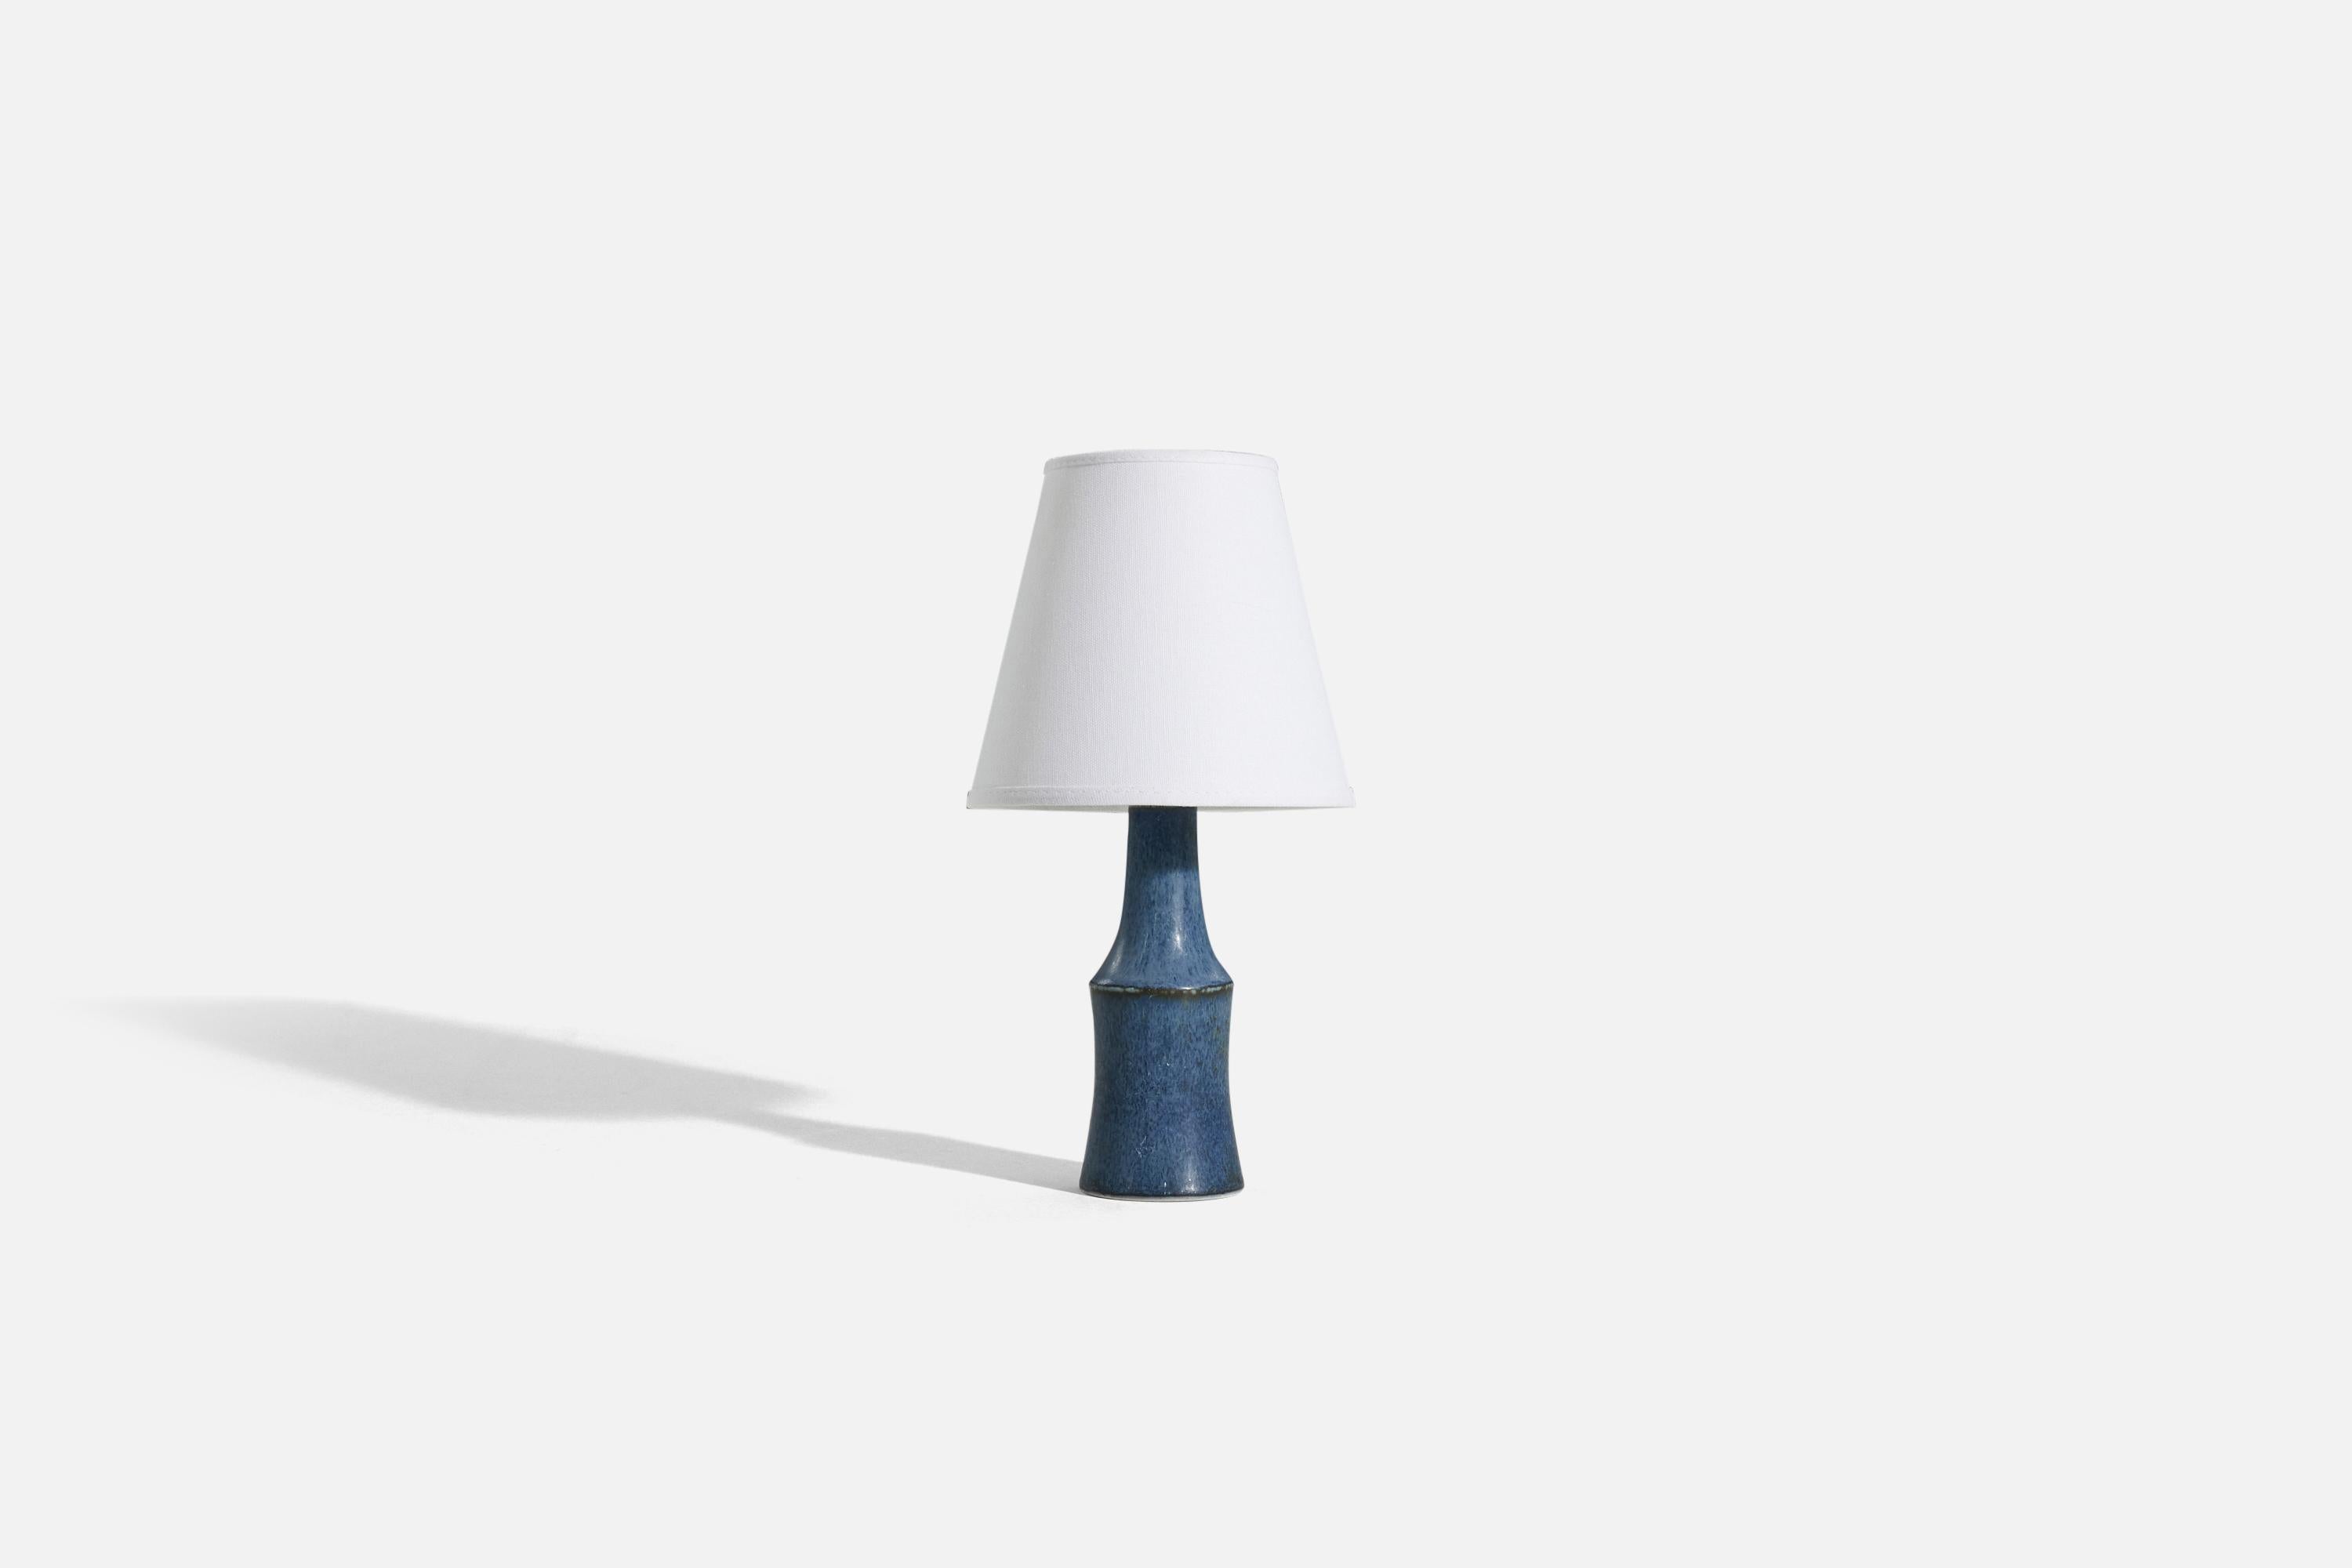 A blue, glazed stoneware table lamp designed by Carl-Harry Stålhane and produced by Rörstrand, Sweden, 1960s. 

Sold without lampshade. 
Dimensions of Lamp (inches) : 9.125 x 2.9375 x 2.9375 (H x W x D)
Dimensions of Shade (inches) : 4 x 6.75 x 6.25